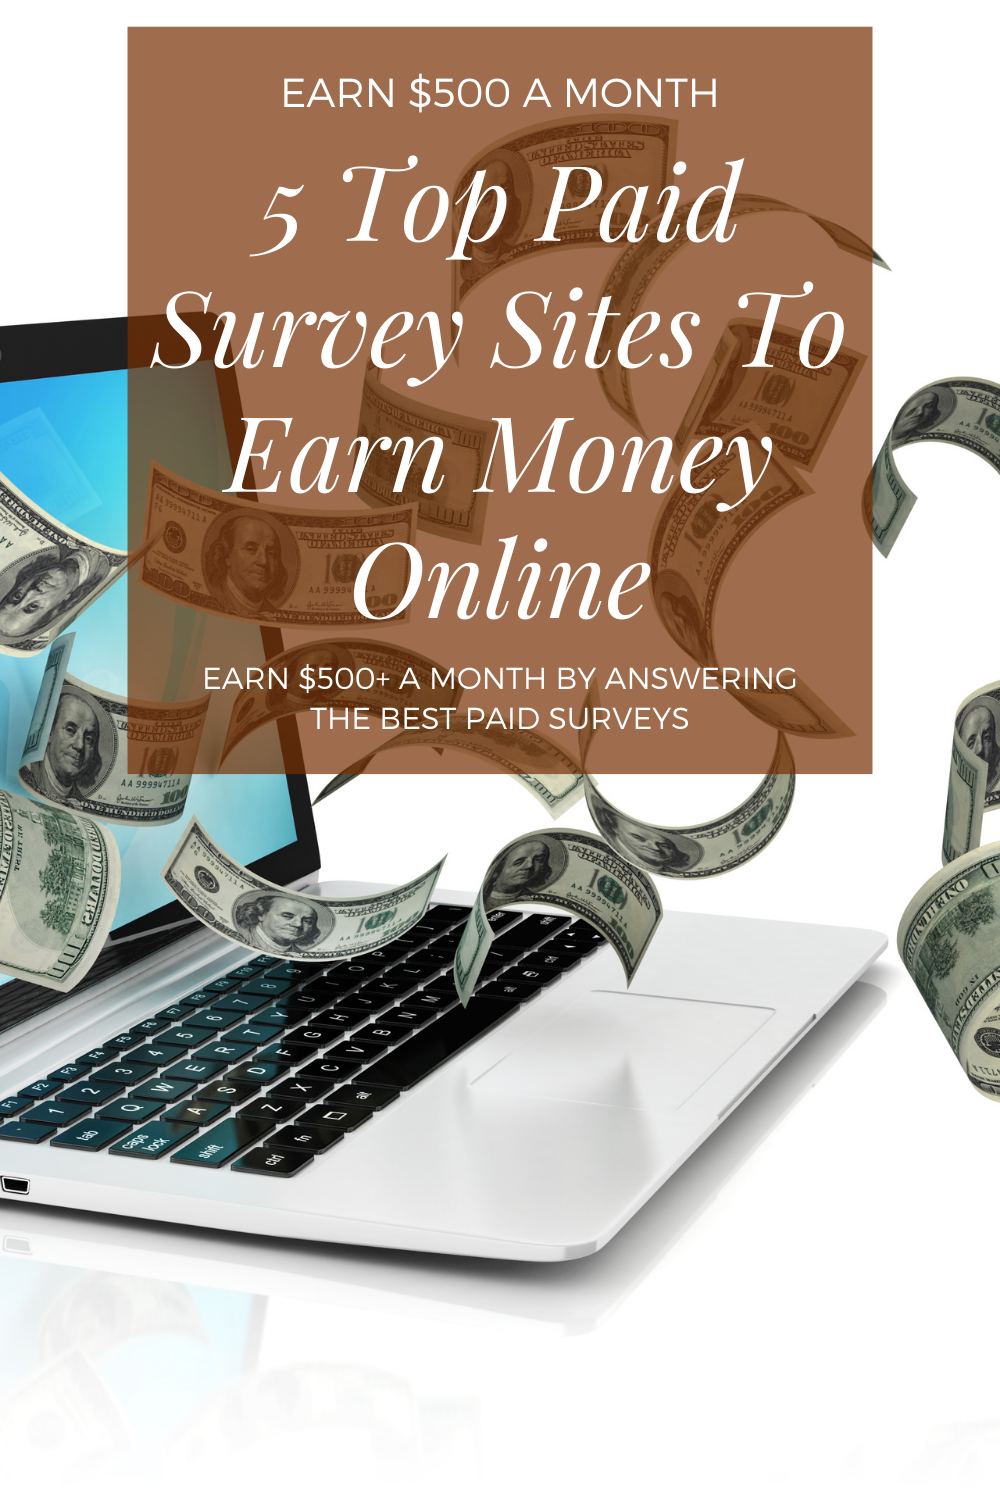 5 Top Paid Survey Sites To Earn Money Online